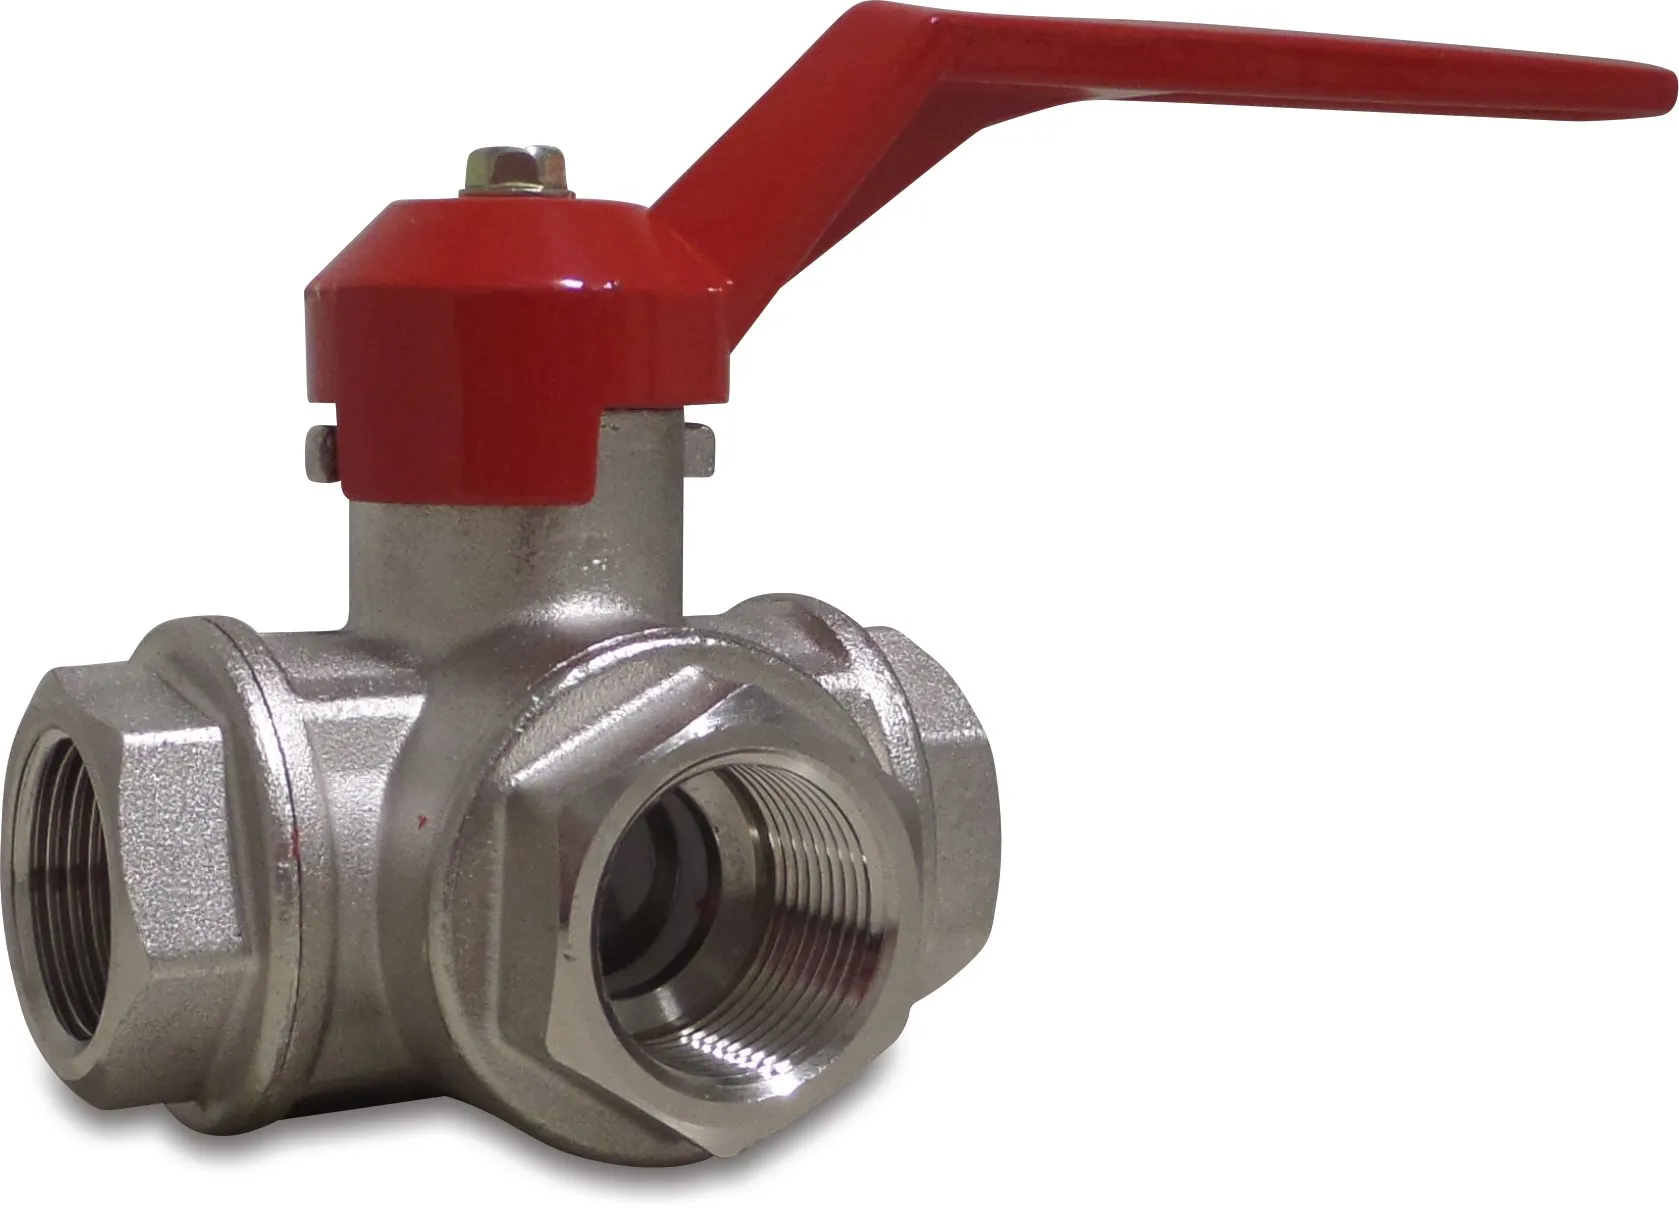 3-way ball valve T-bore brass nickel plated 1/4" female thread 16bar DN8 side connection